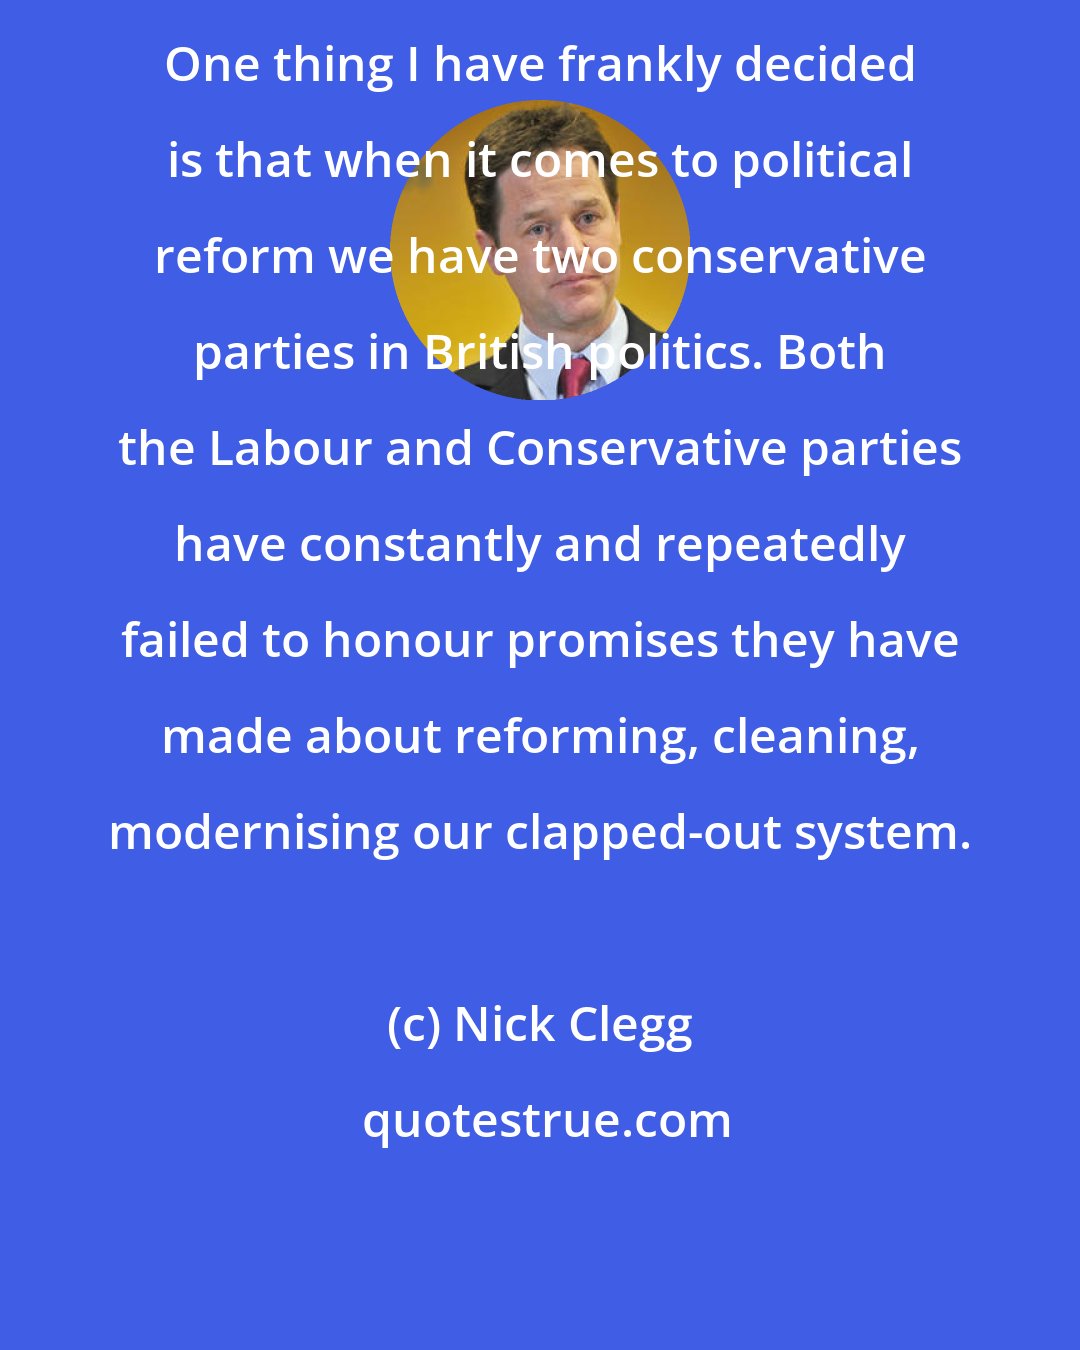 Nick Clegg: One thing I have frankly decided is that when it comes to political reform we have two conservative parties in British politics. Both the Labour and Conservative parties have constantly and repeatedly failed to honour promises they have made about reforming, cleaning, modernising our clapped-out system.